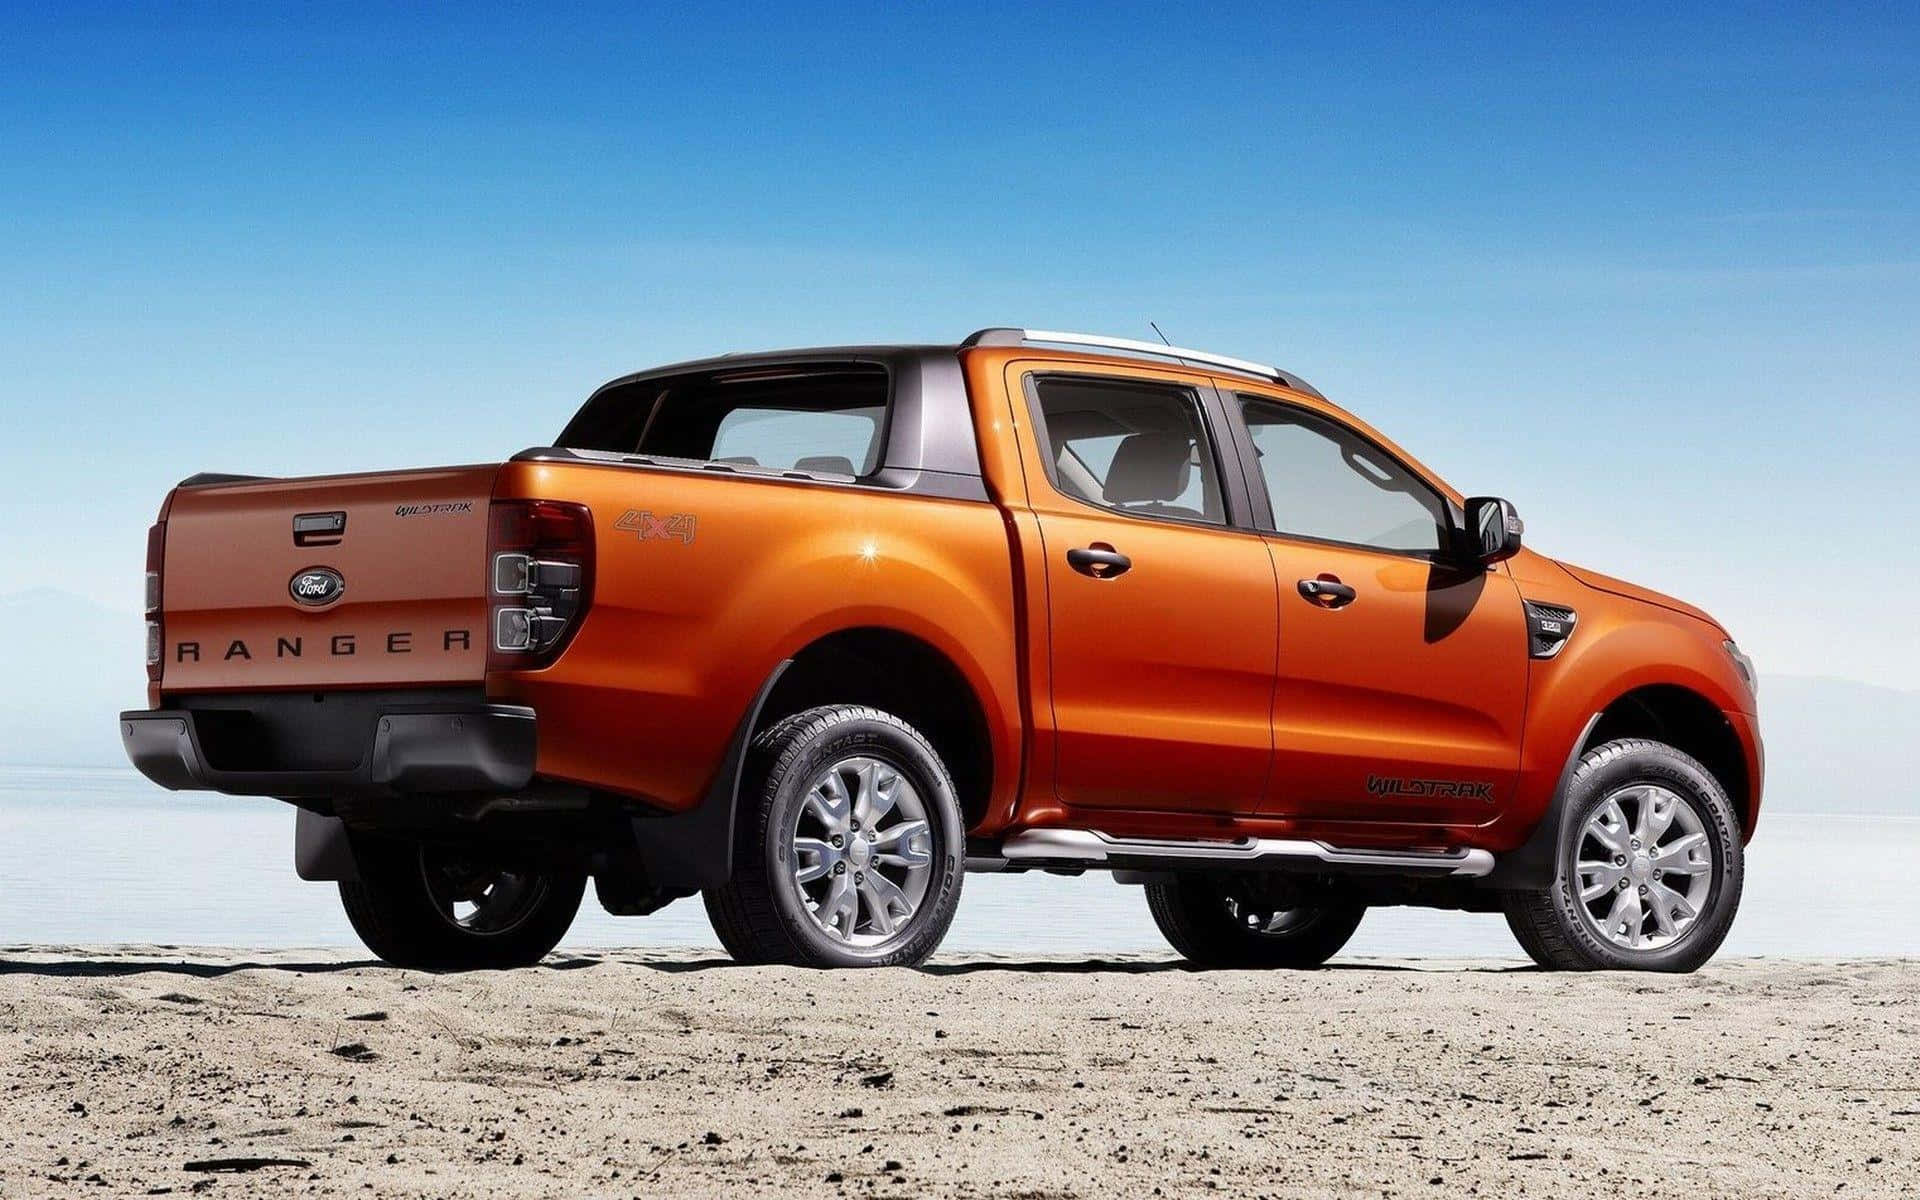 Caption: Powerful Ford Ranger on a Scenic Adventure Wallpaper